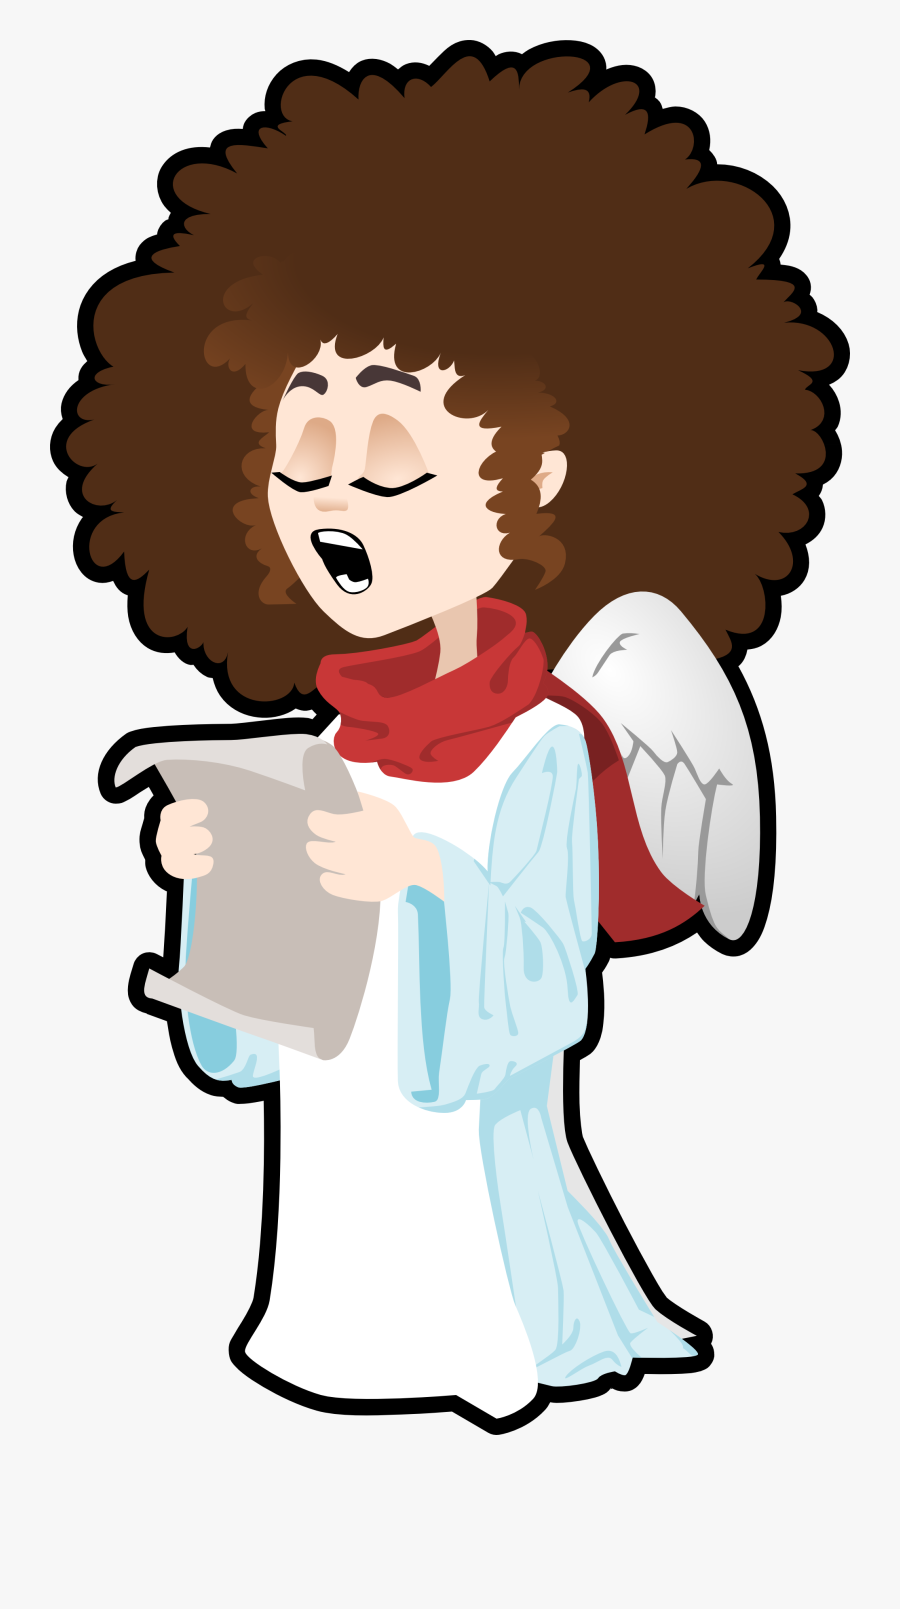 Free Angel Singing Clip Art - Angel Singing Clipart, Transparent Clipart